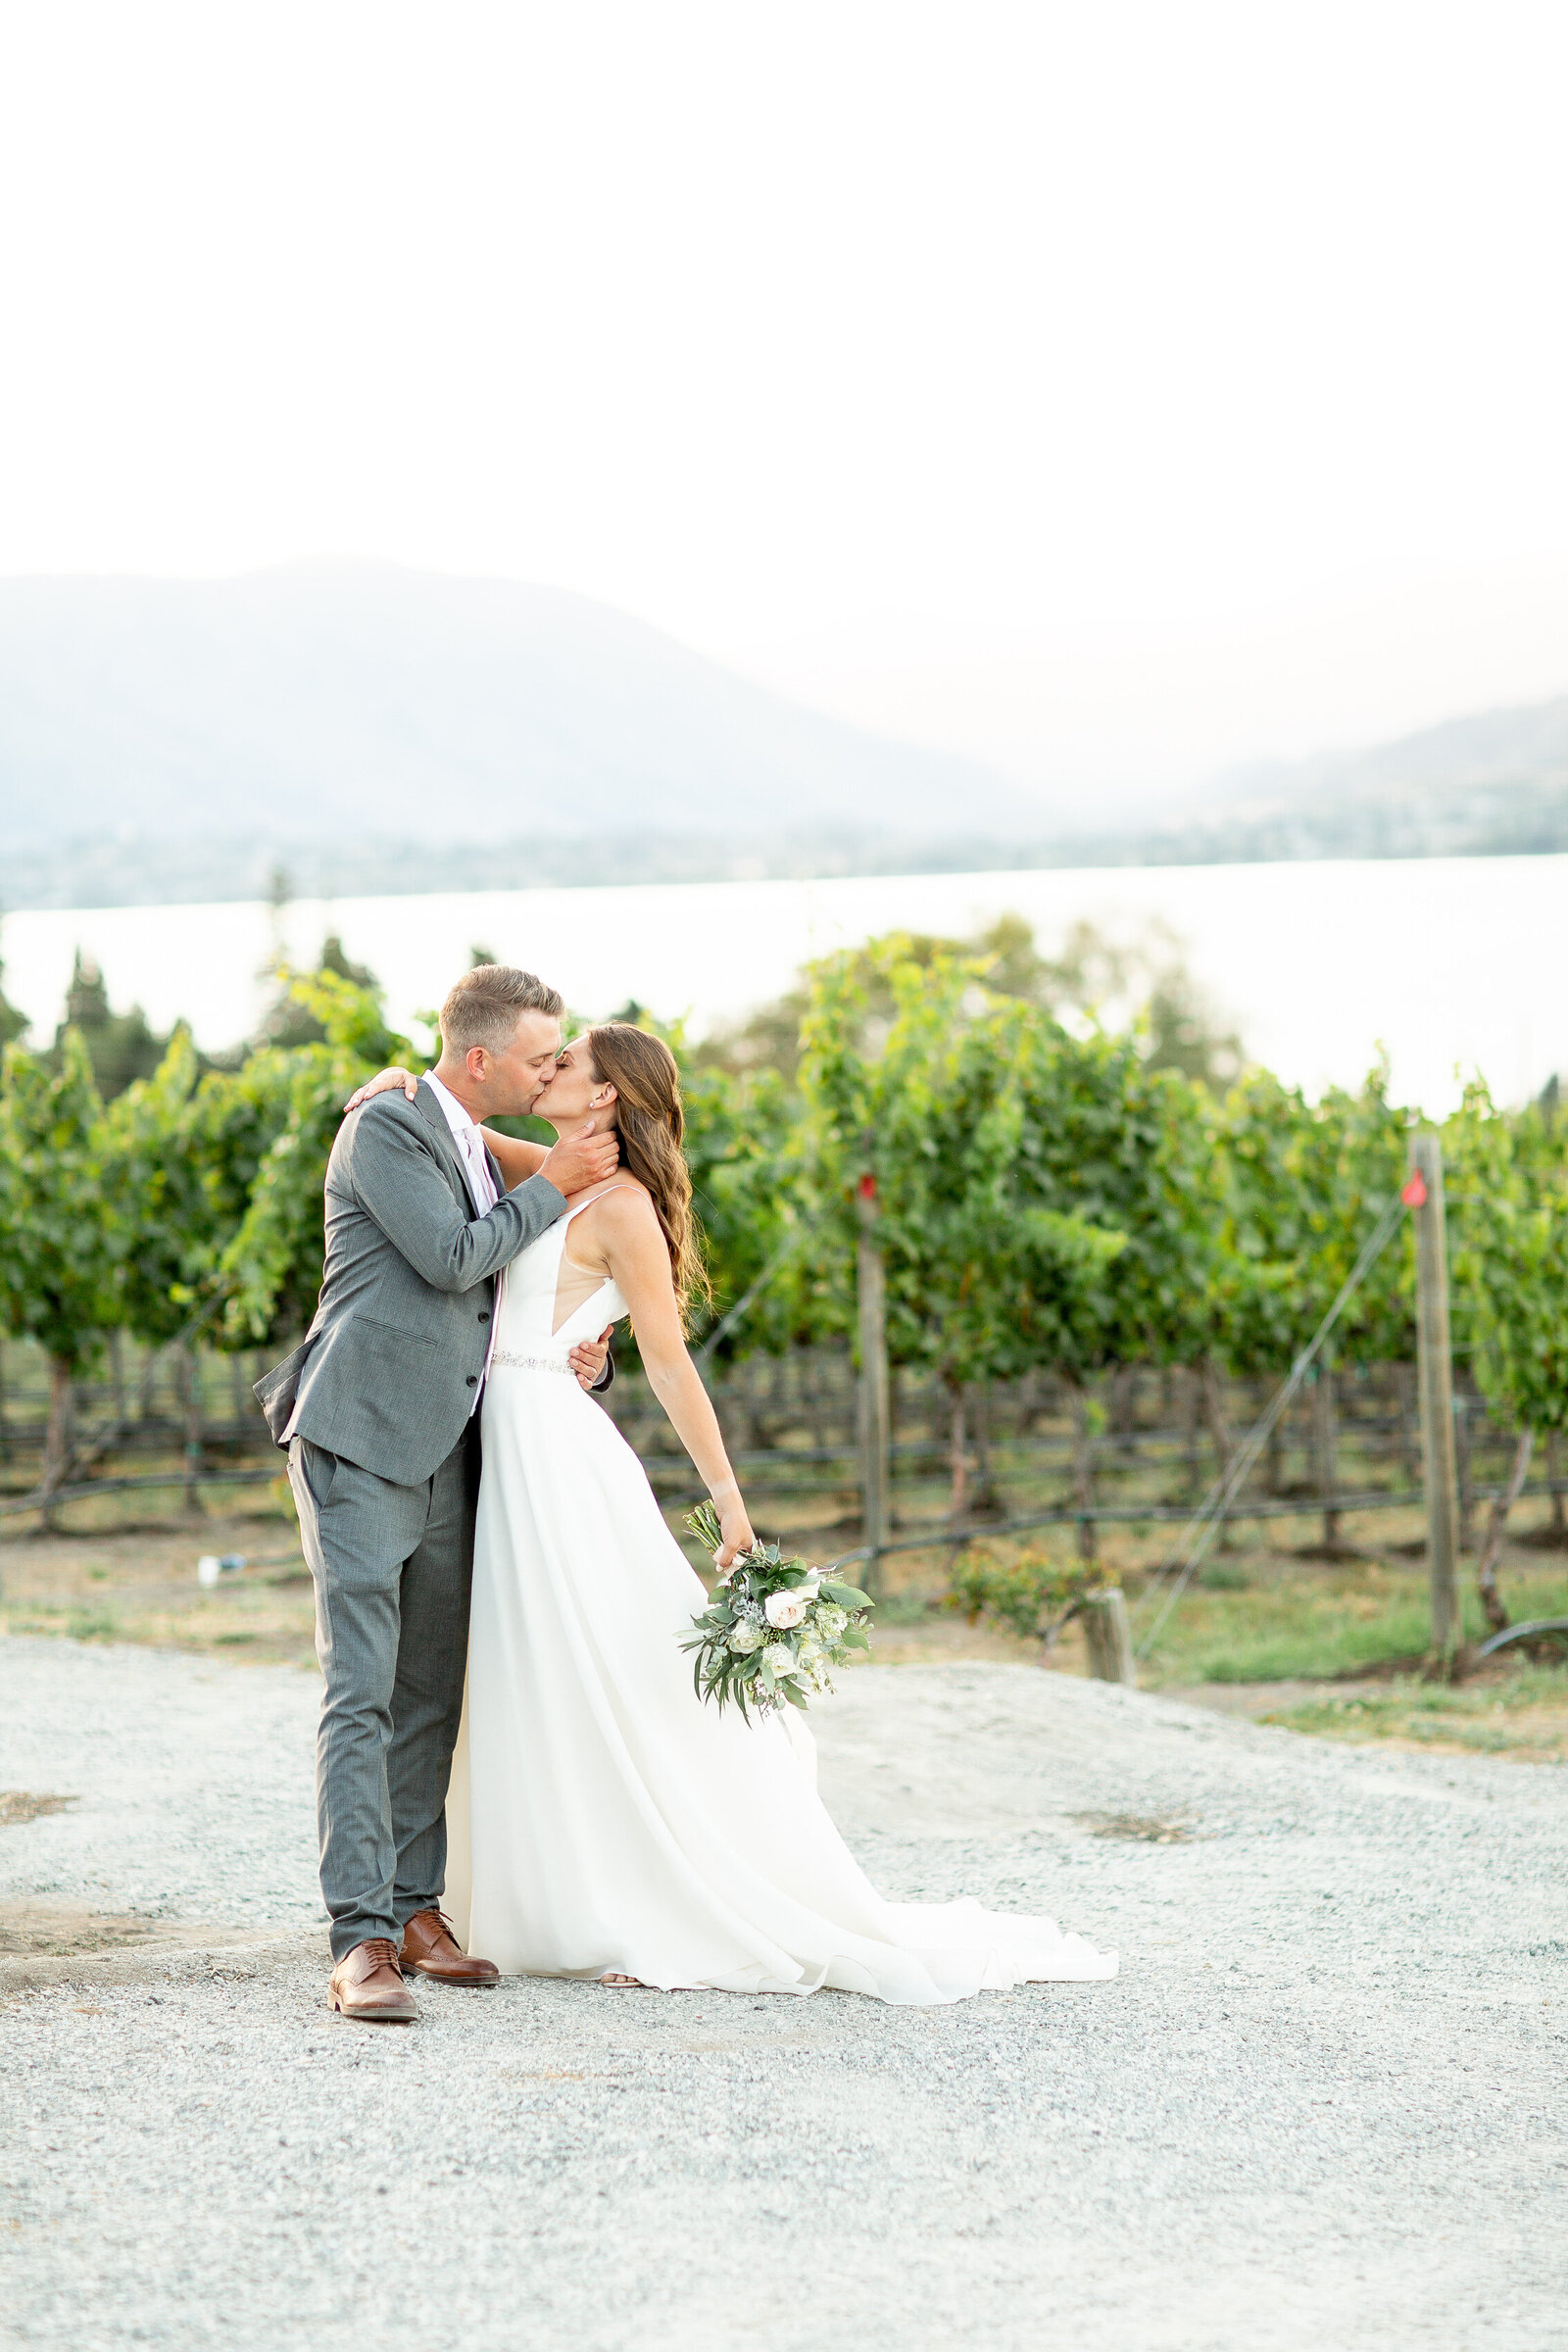 Will & Betsy | Potraits | Emily Moller Photography | Lake Chelan Family Photographer1Q5A6111